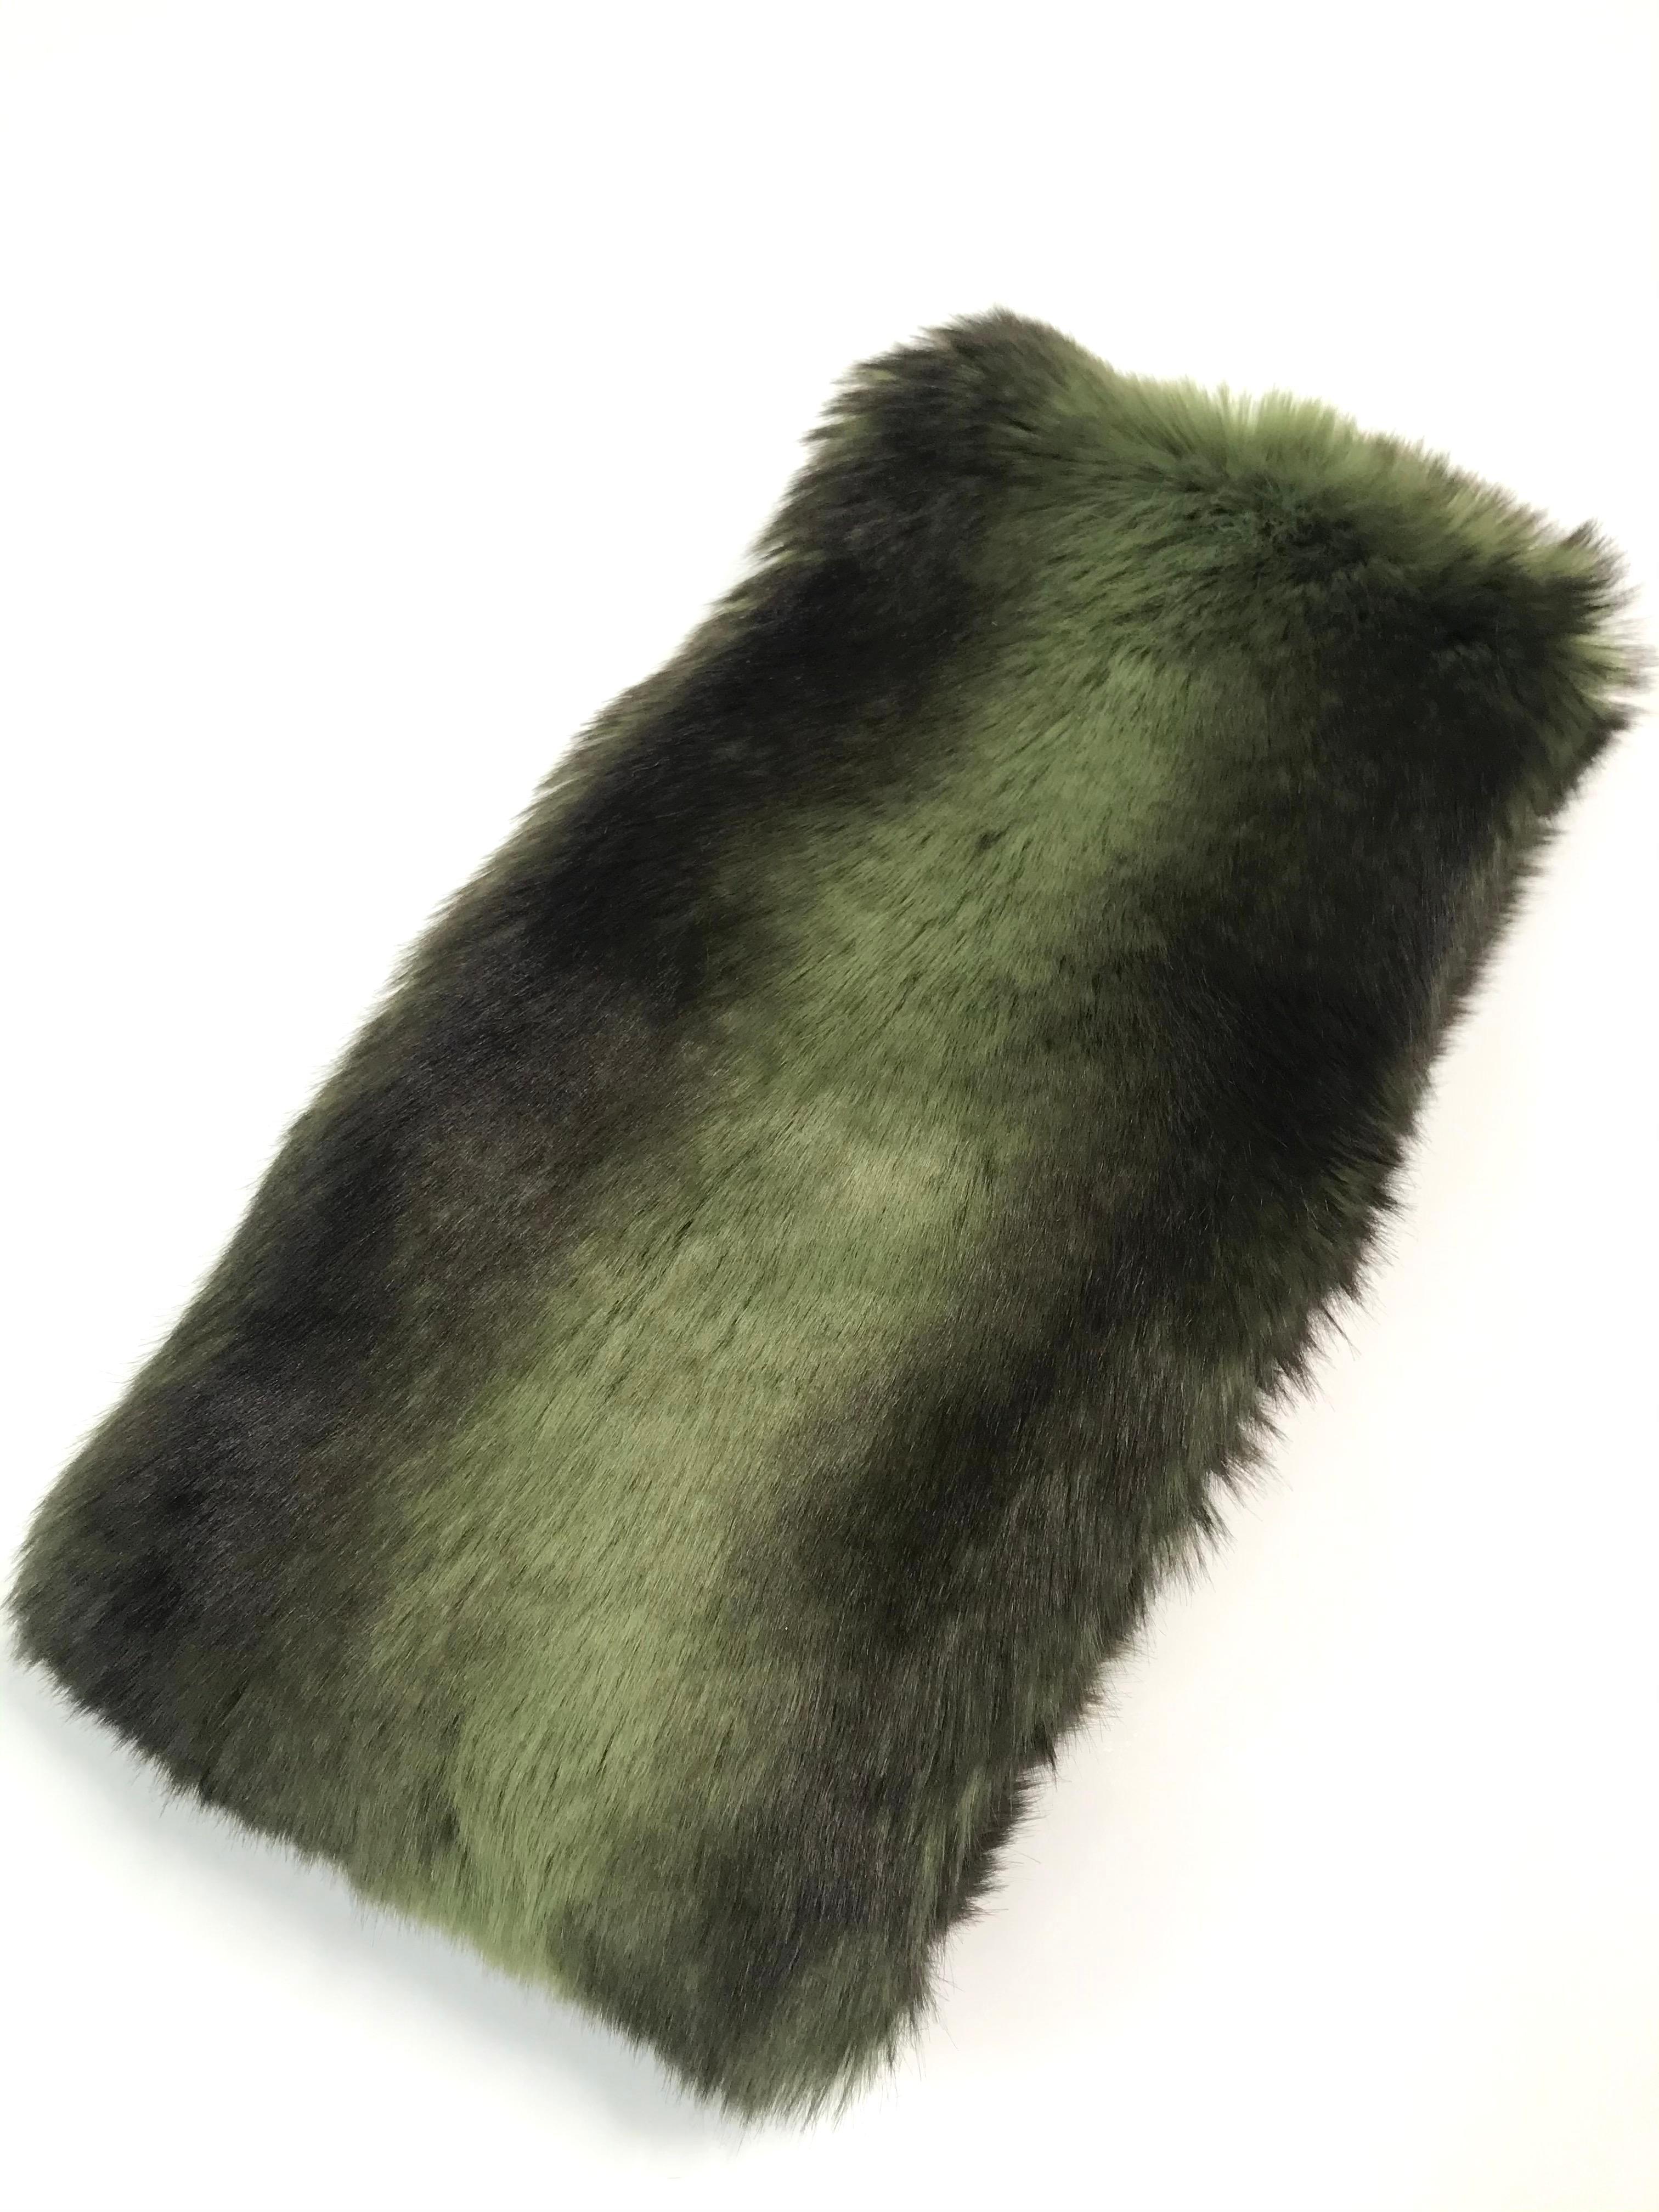 Pelush Faux Fur Scarfs set - Fake Fur Green Chinchilla Neck Warmer/Hats One size In New Condition For Sale In Greenwich, CT